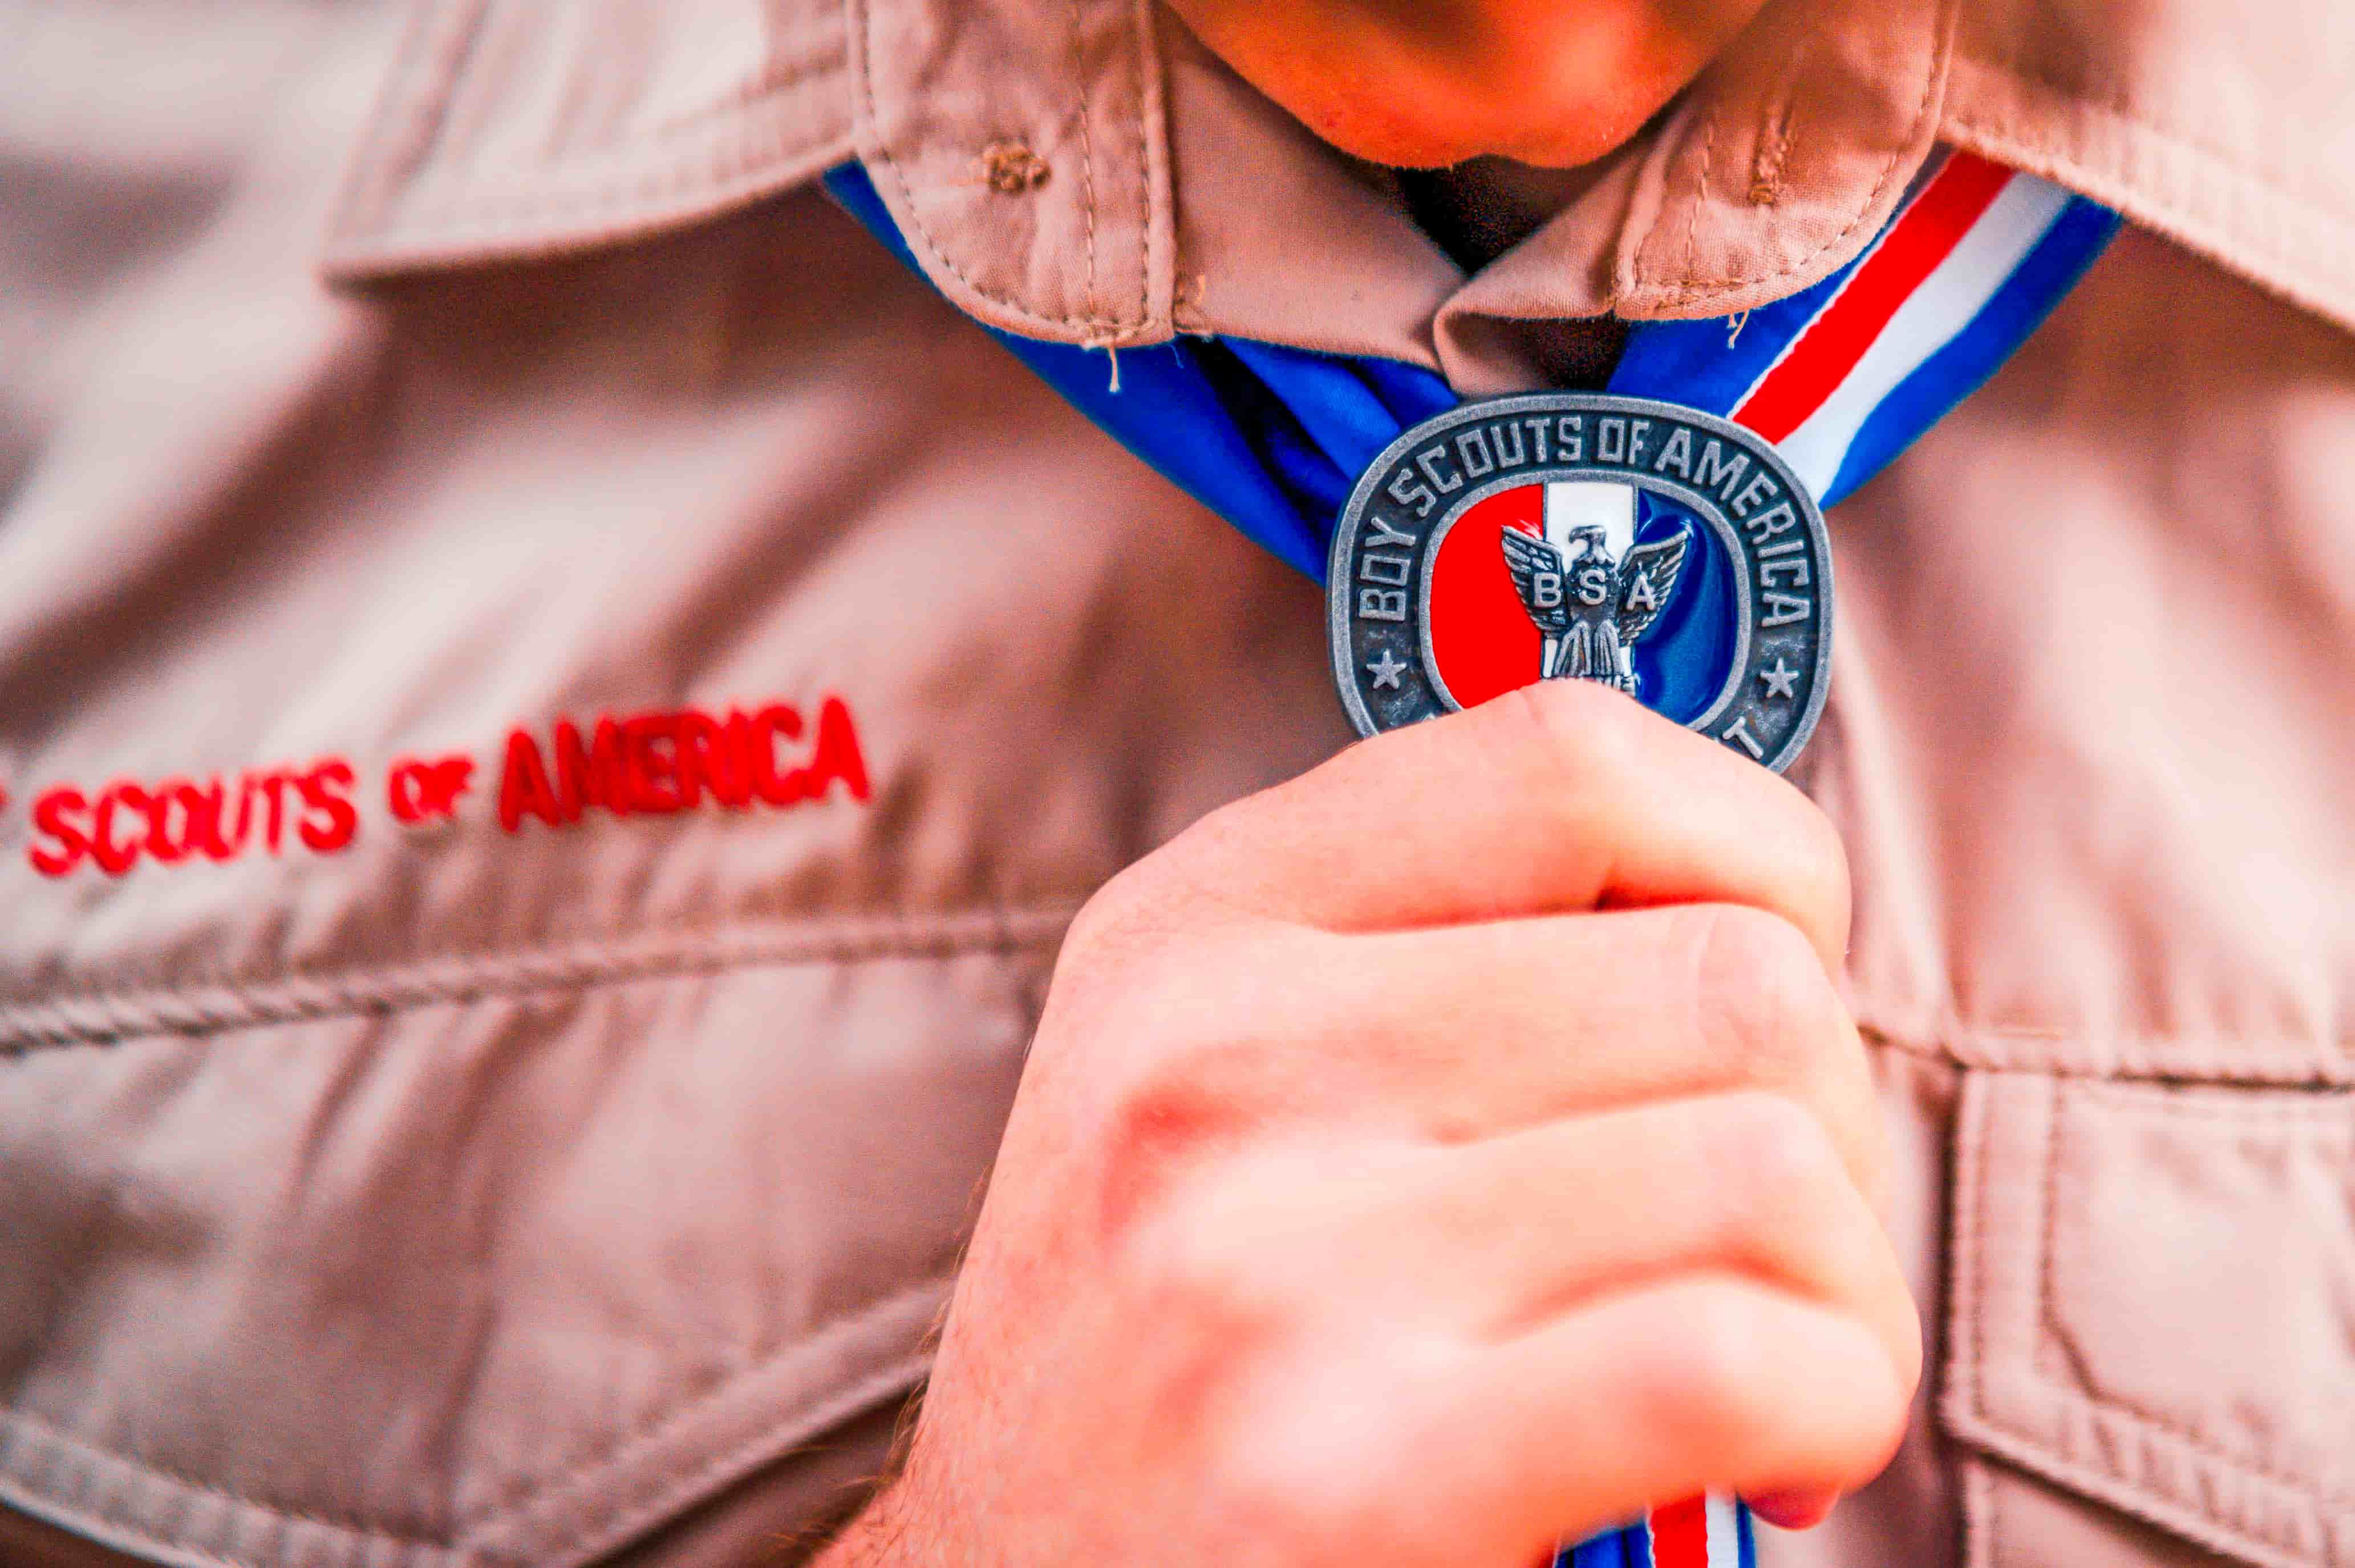 Boy Scouts to Drop the "Boy" in a Major, Inclusive Rebrand